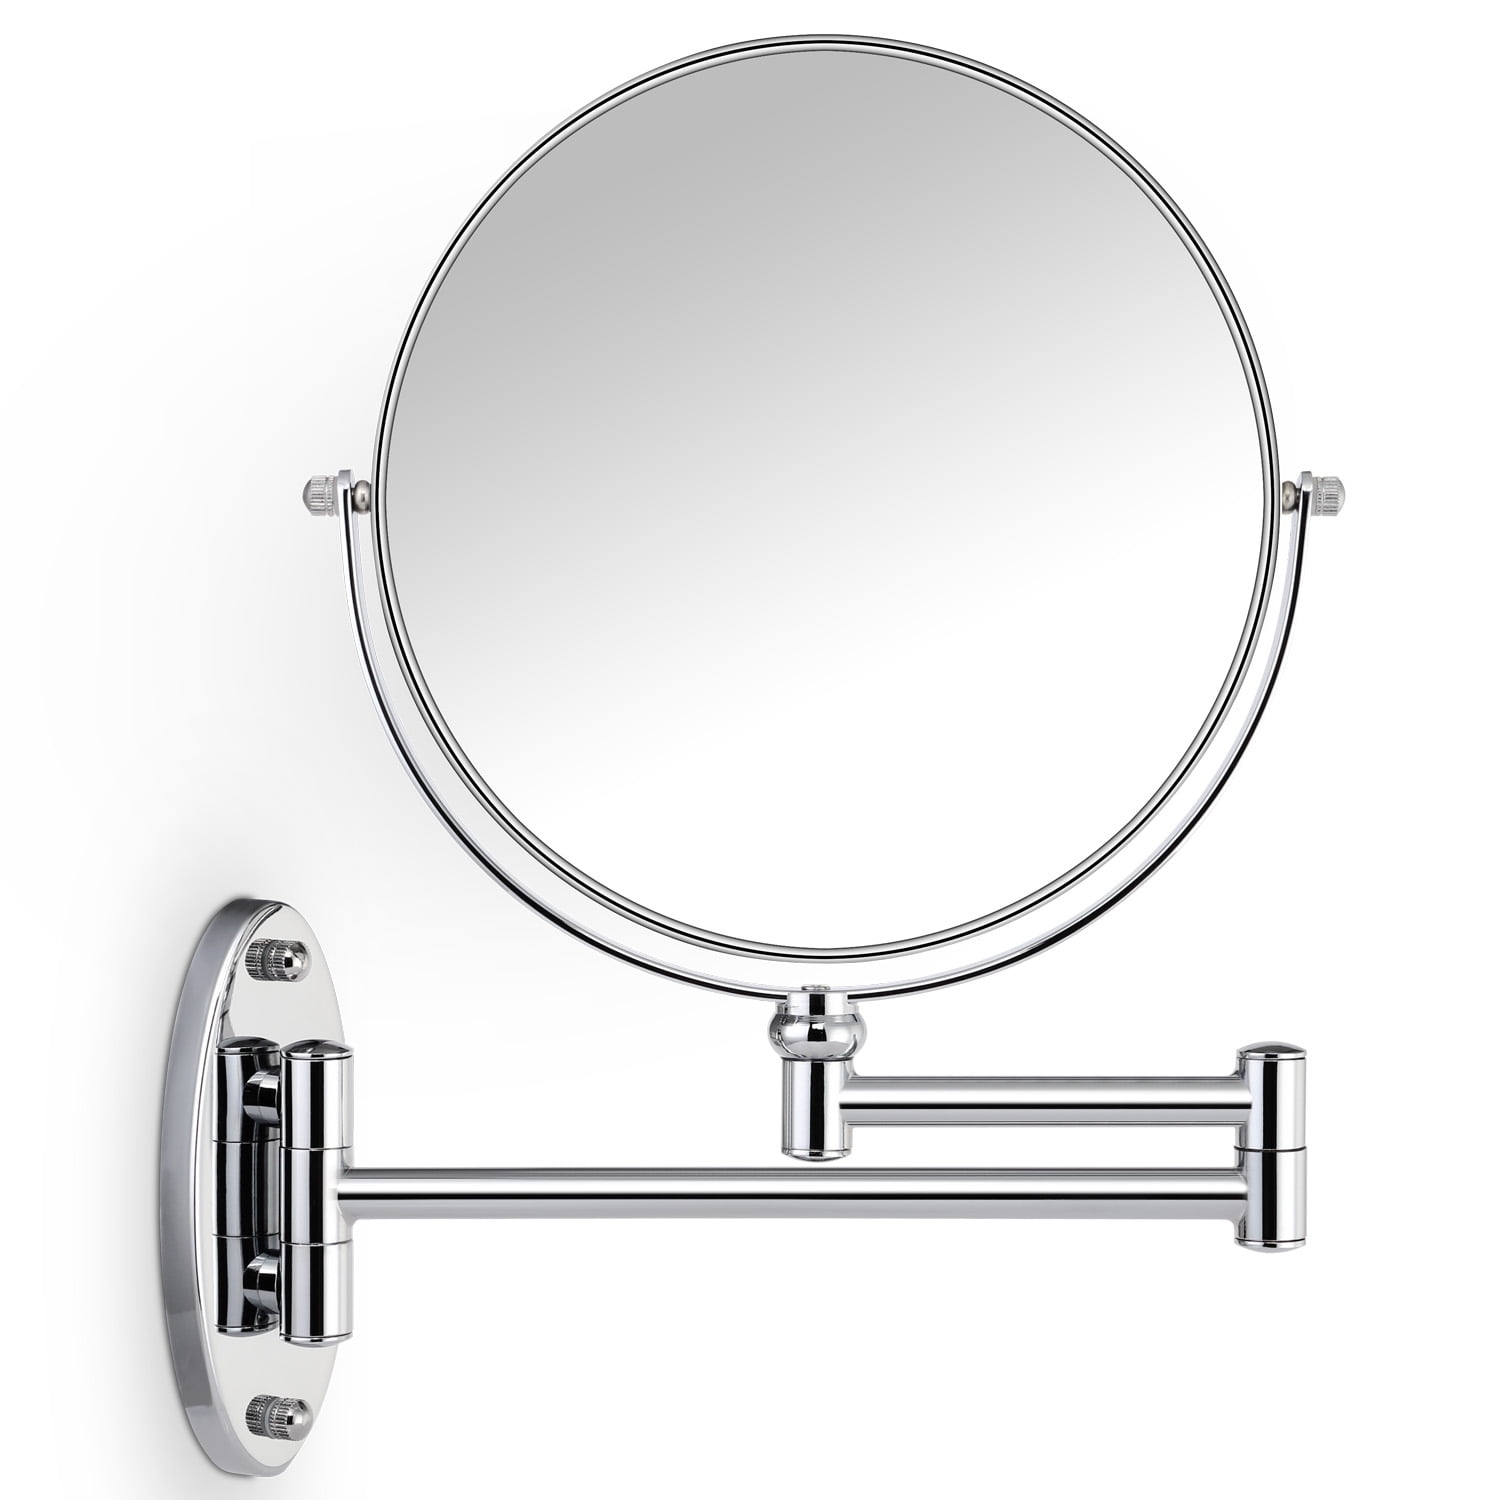 Double-Sided Extendable Bathroom Mirror,1:1und1:3-Black Make up Mirror Magnifying X10 8 Inch Magnifying Shaving Mirror 360°Rotation ZHMIRROR Shaving Mirror Wall Mounted 